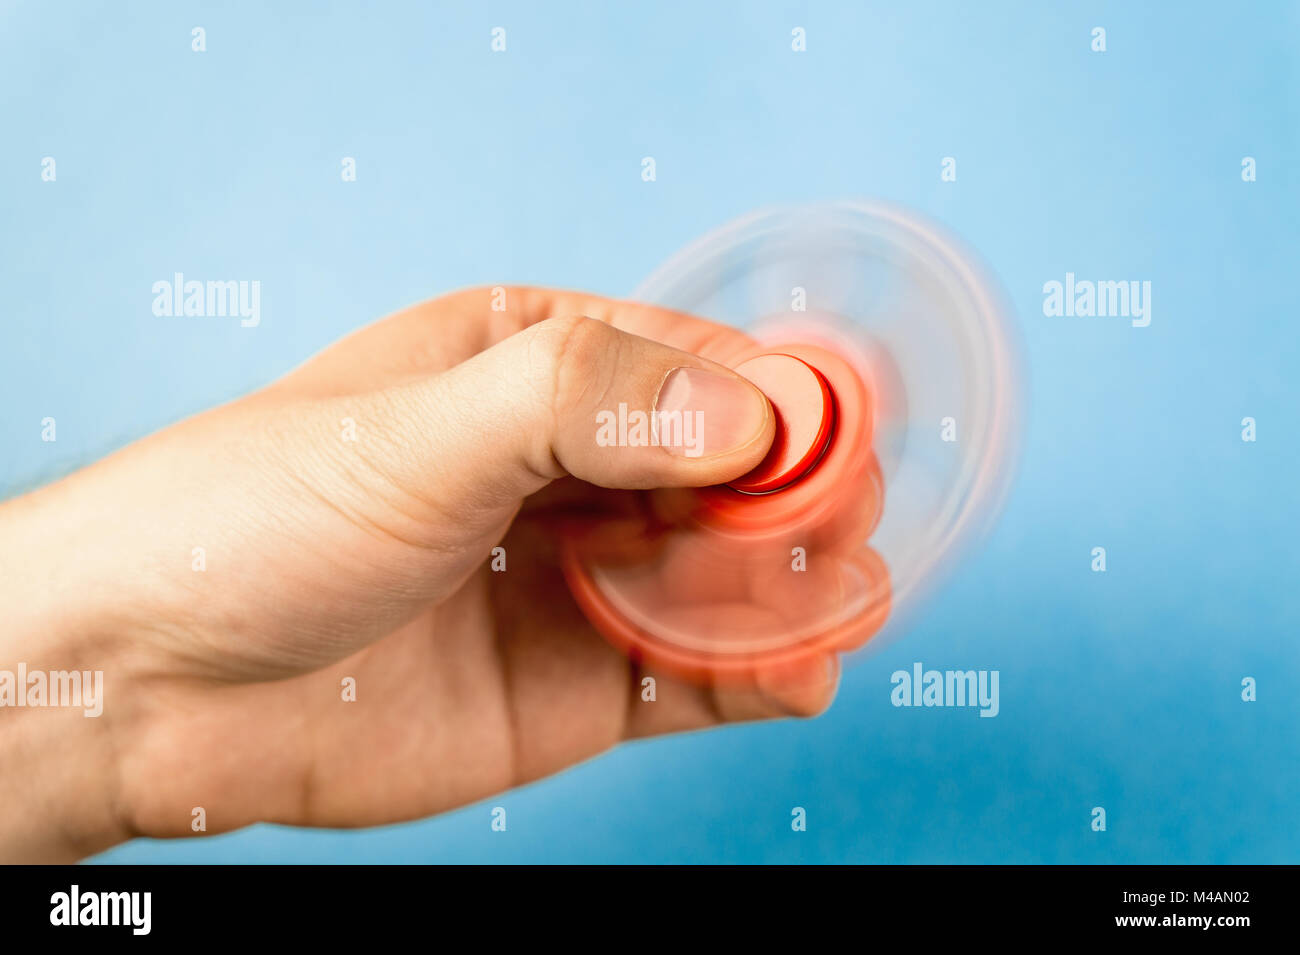 Fidget spinner spinning in hand with blue background. Stock Photo